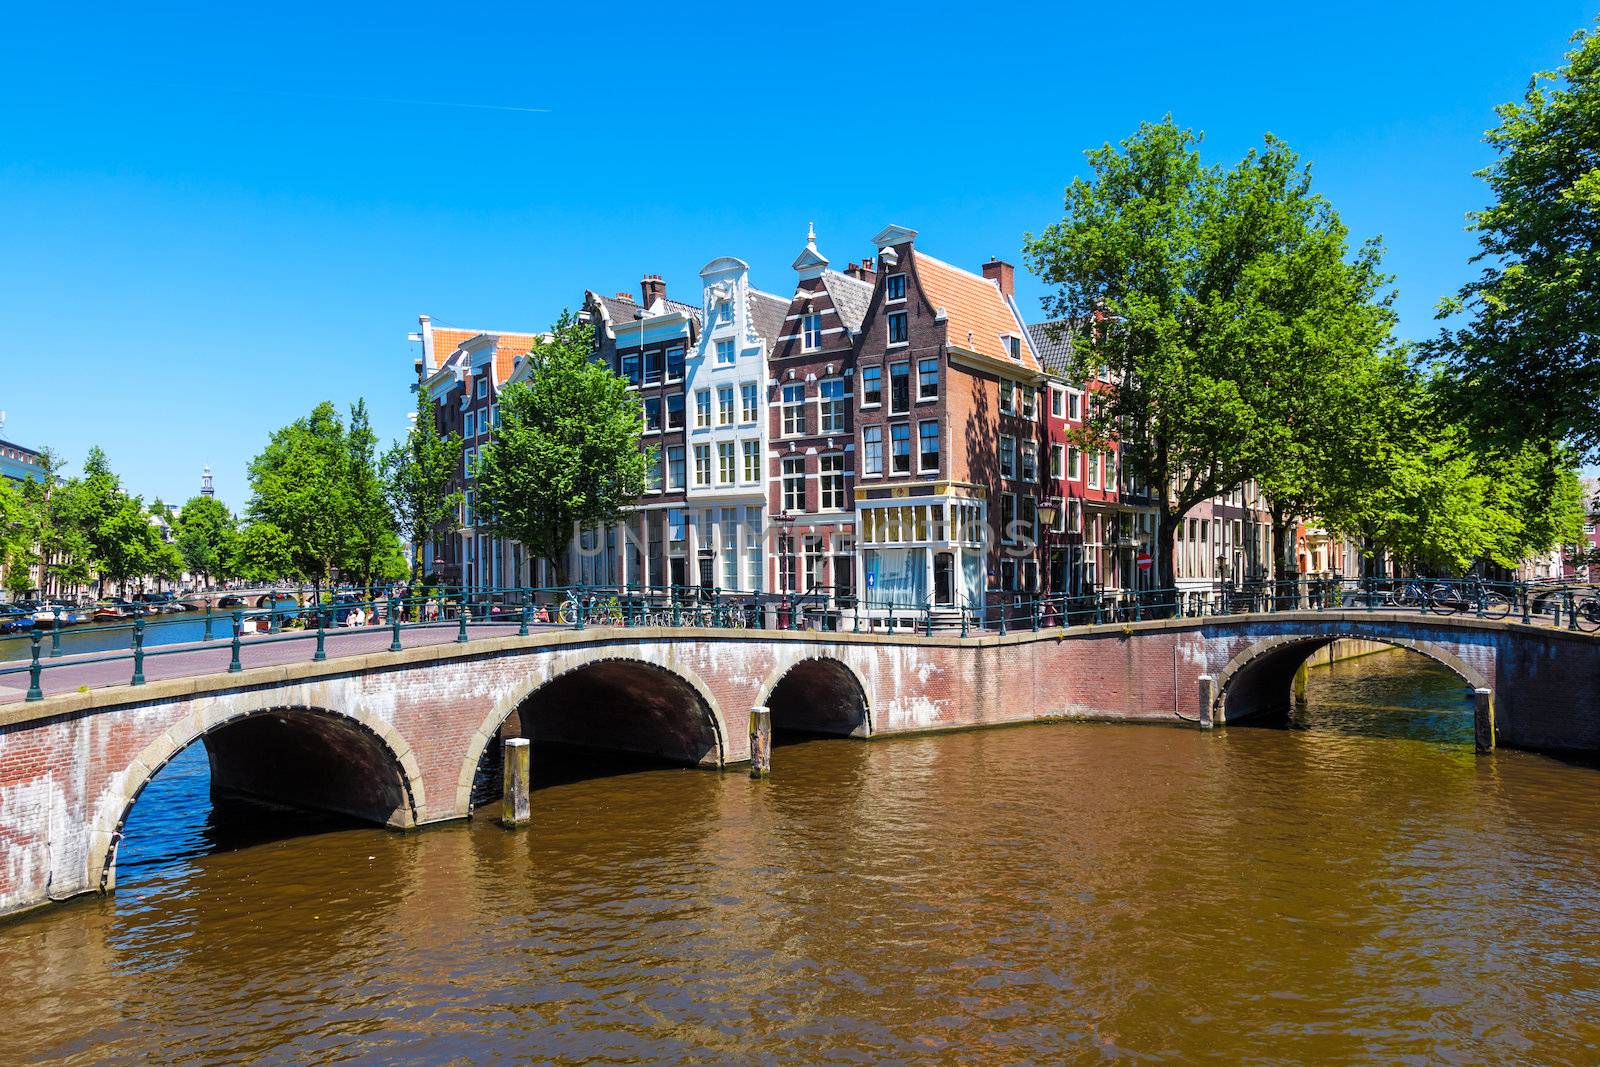 Typical Amsterdam scene with canals, bridges and bicycles